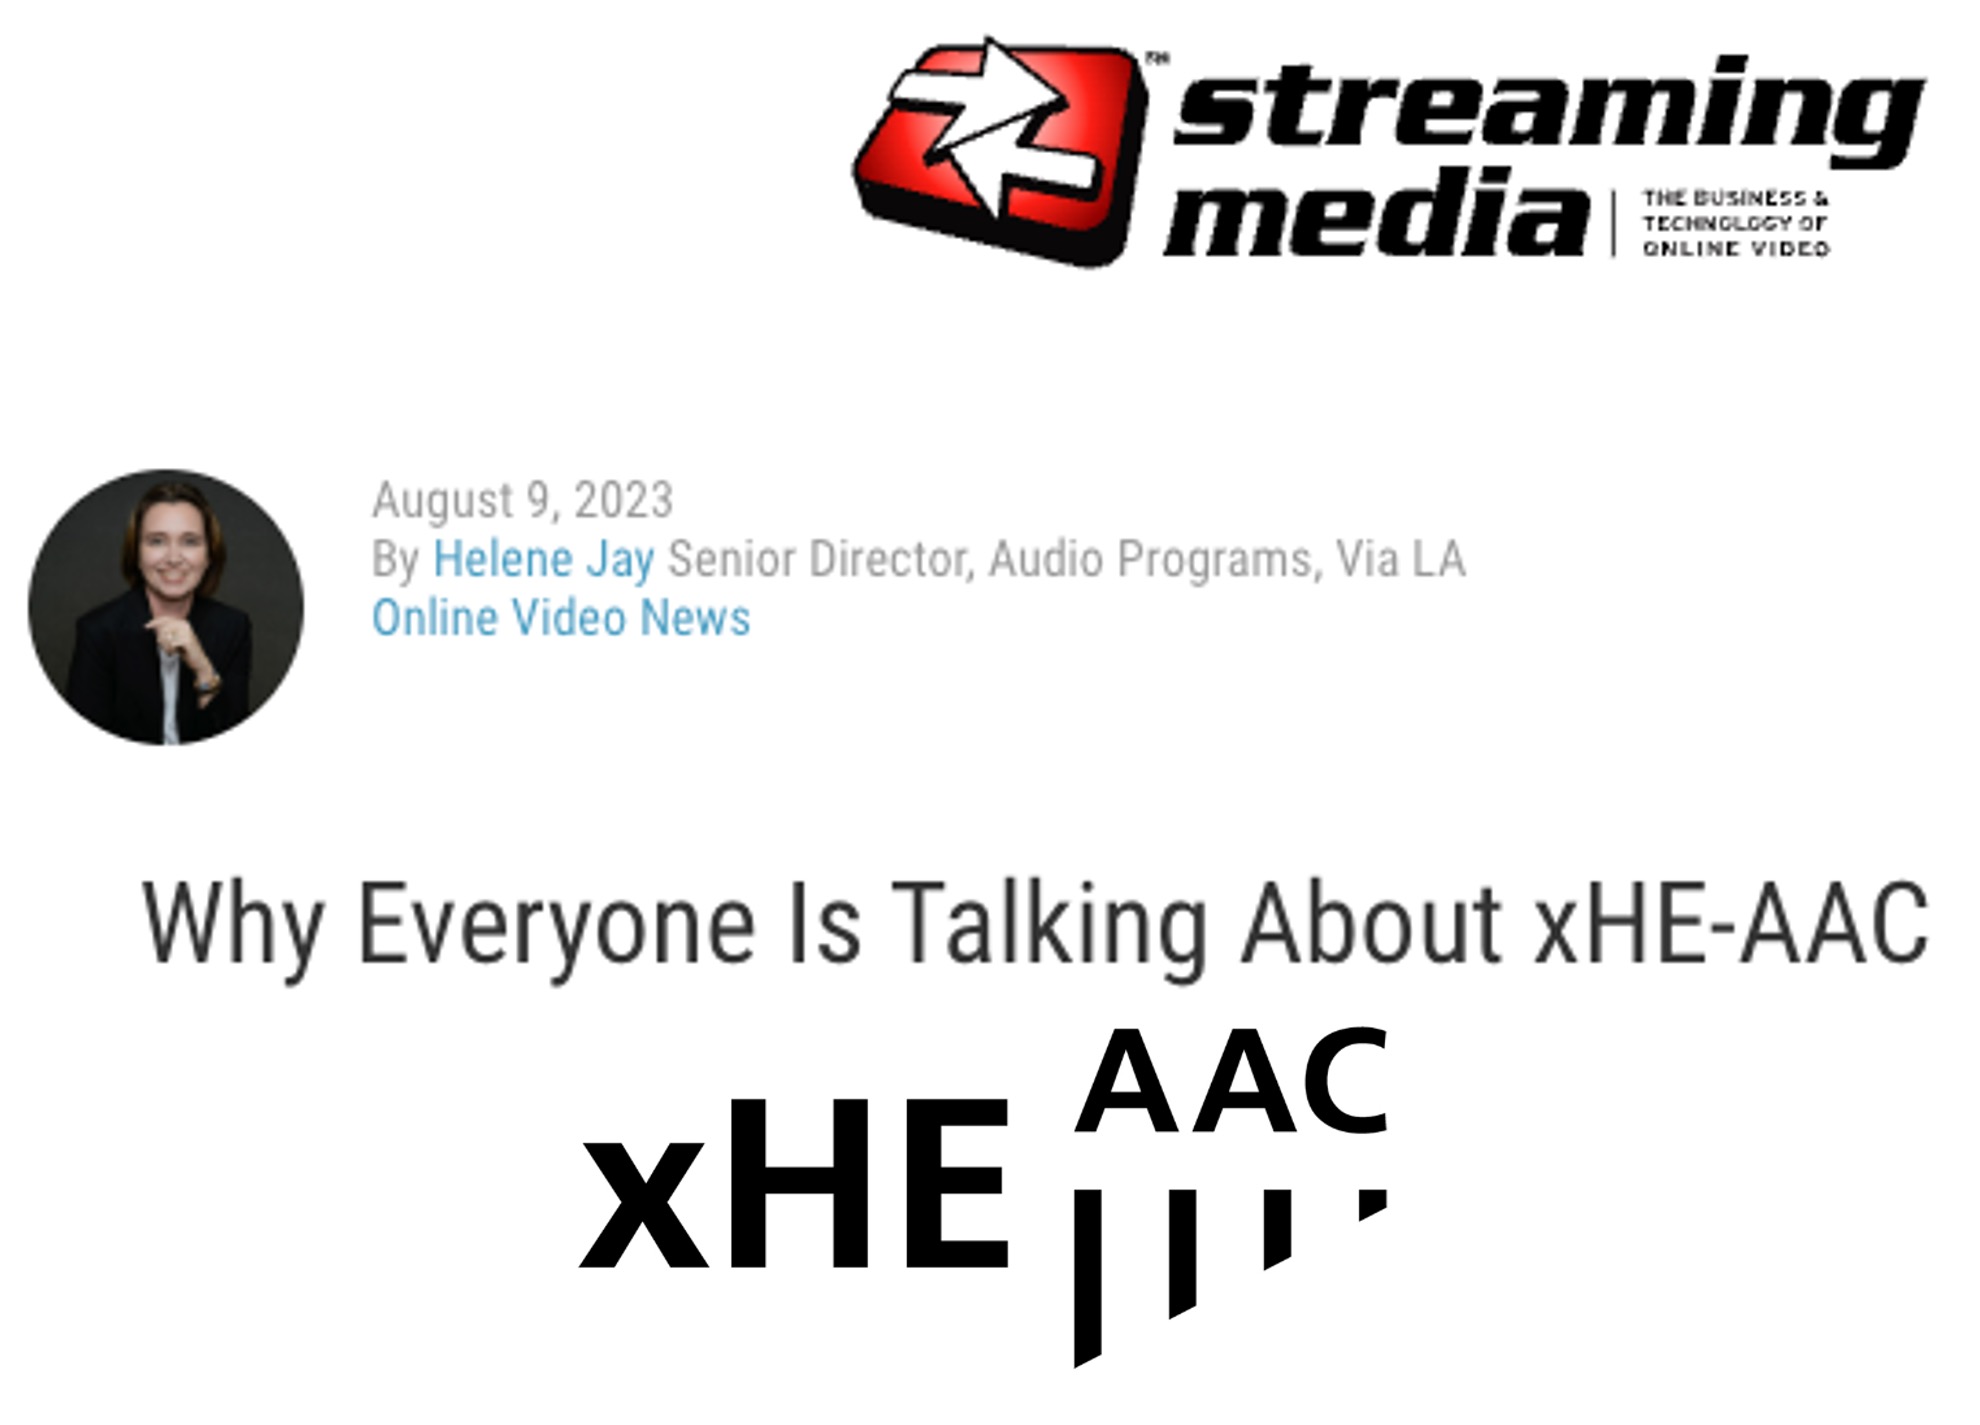 Streaming Media: Why Everyone Is Talking About xHE-AAC